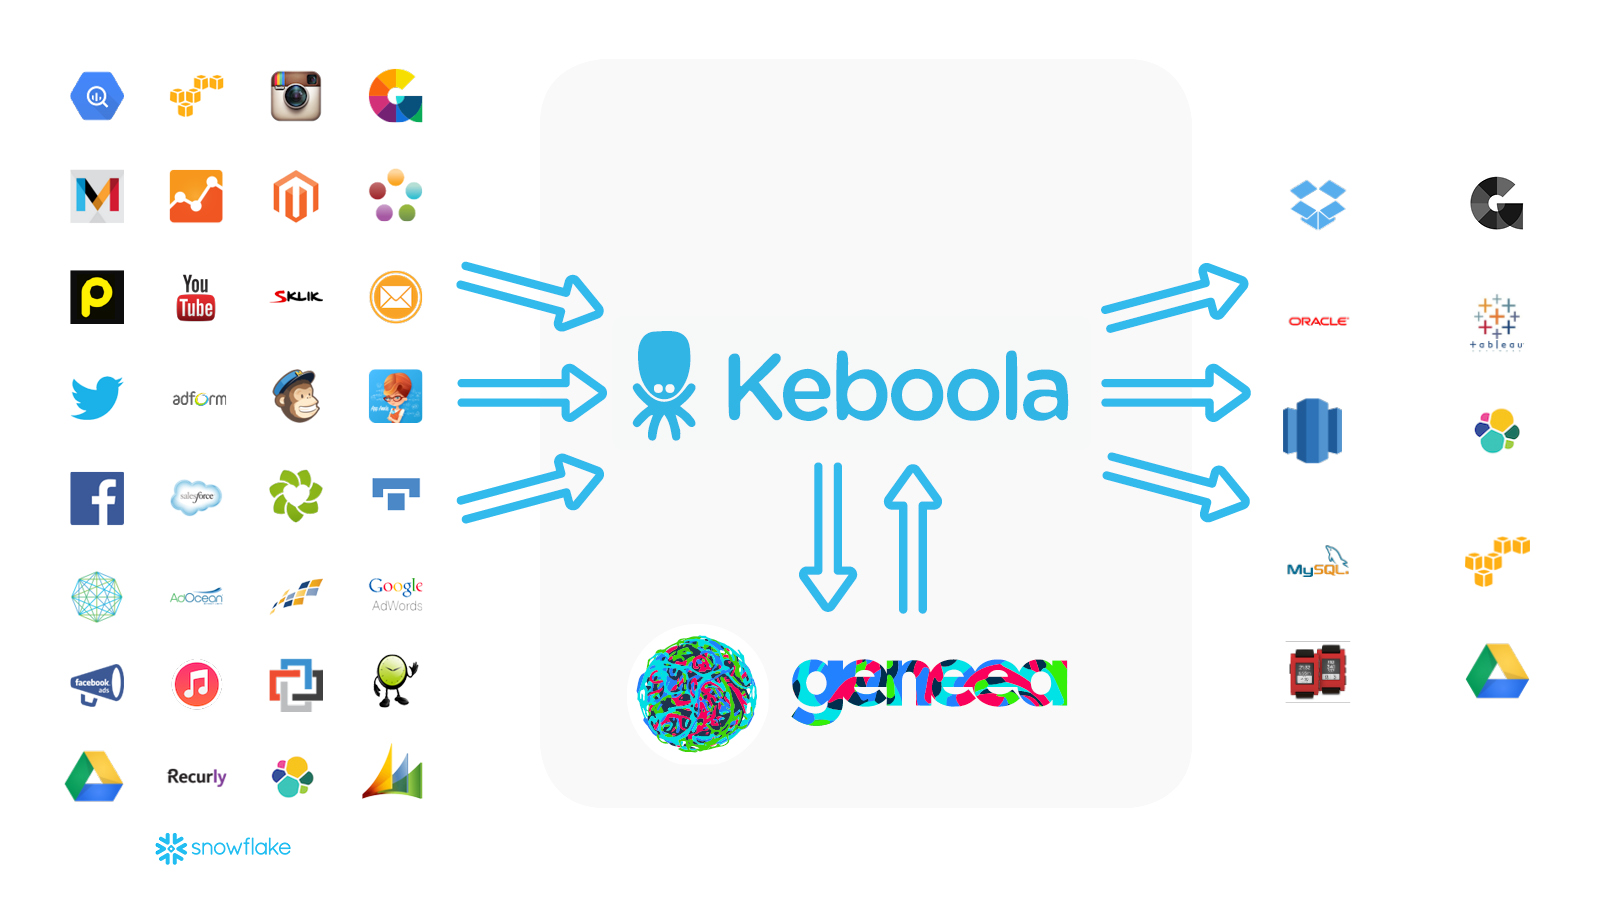 A graph depicting the integration workflow in Keboola